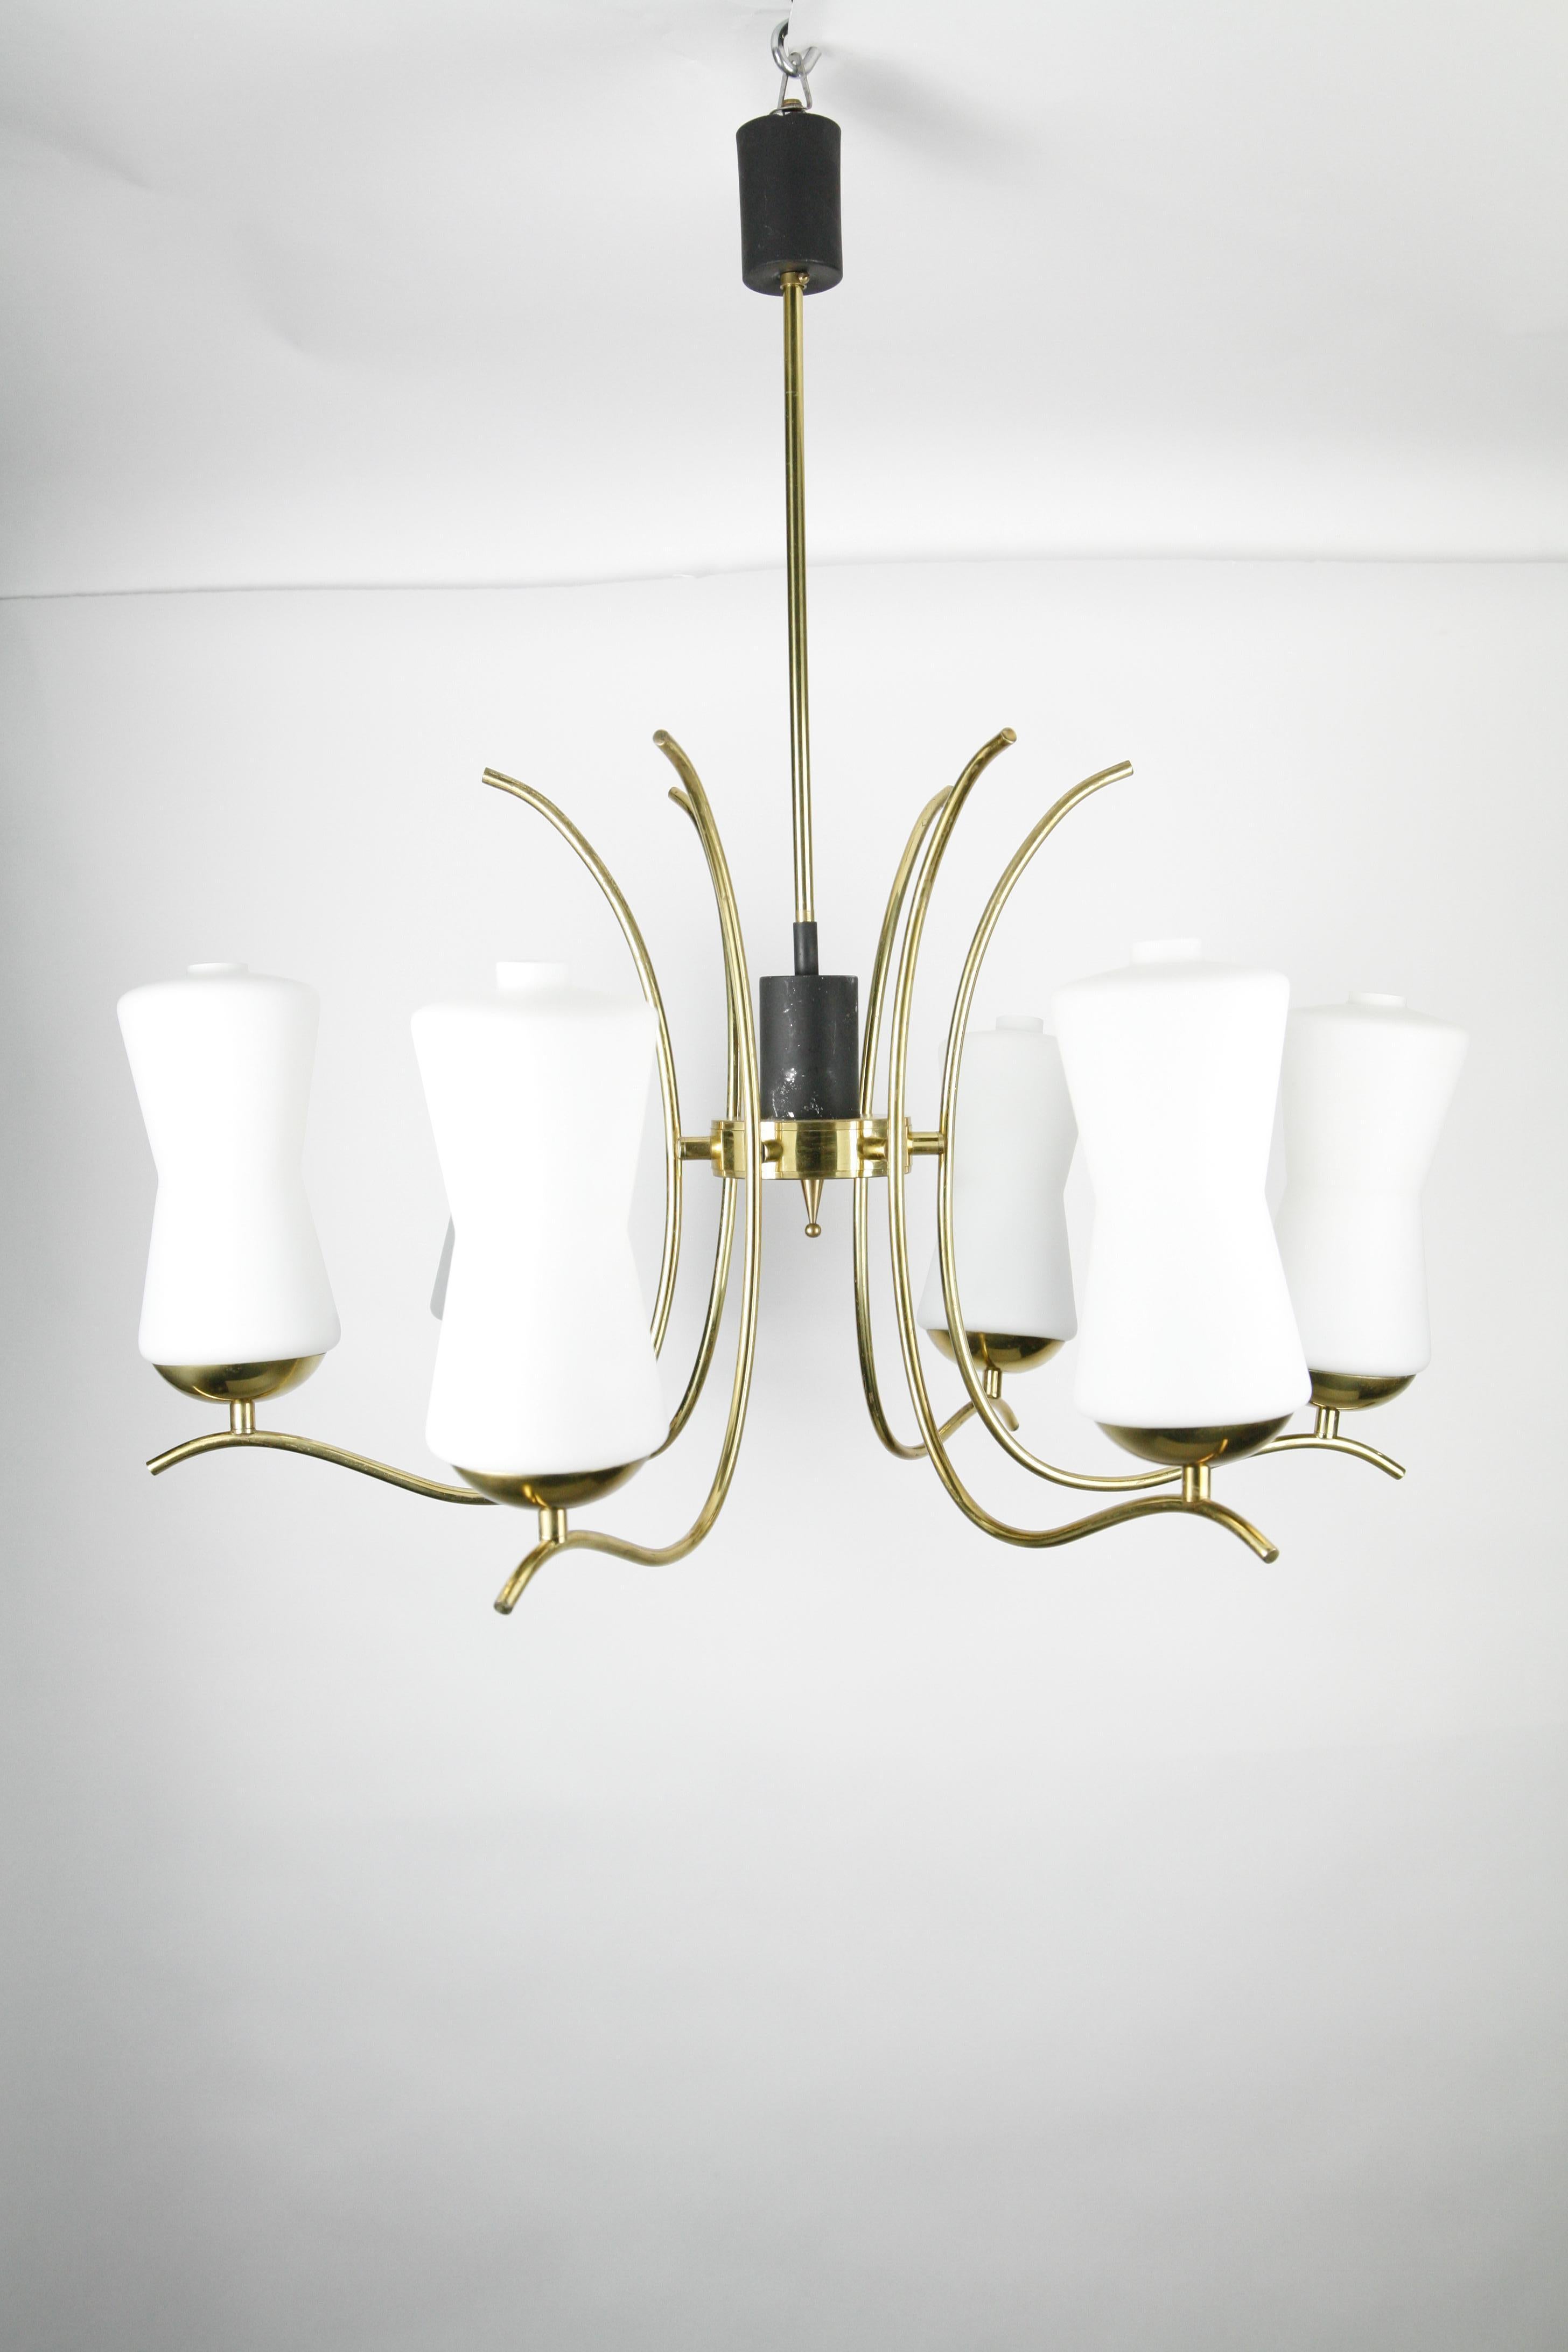 Stilnovo mid 20th century 1960s brass-plated frame that has a matte black canopy to the ceiling and a similar canopy on the stem which gives great symmetry not to mention a very chick look with 7 individual opaline glass shades that measure 7.7